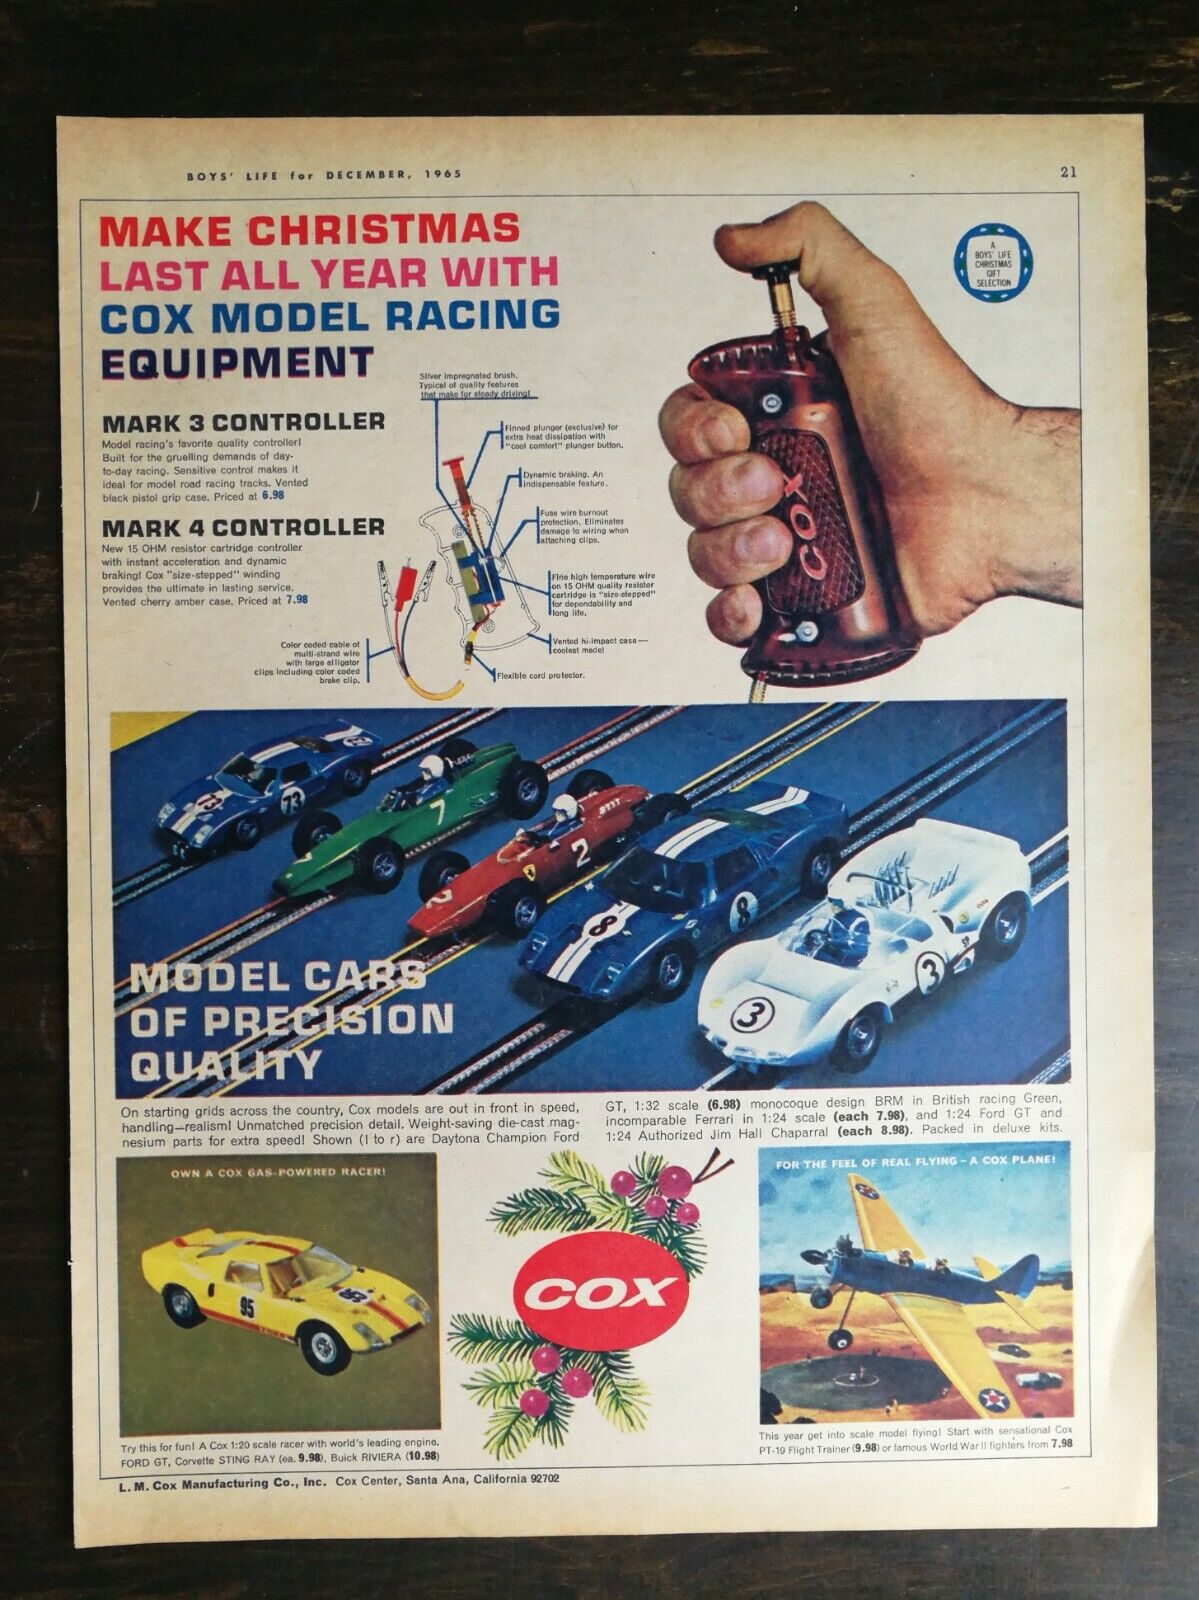 Vintage 1966 Cox Model Racing Model Cars Airplanes Full Page Original Ad - 721